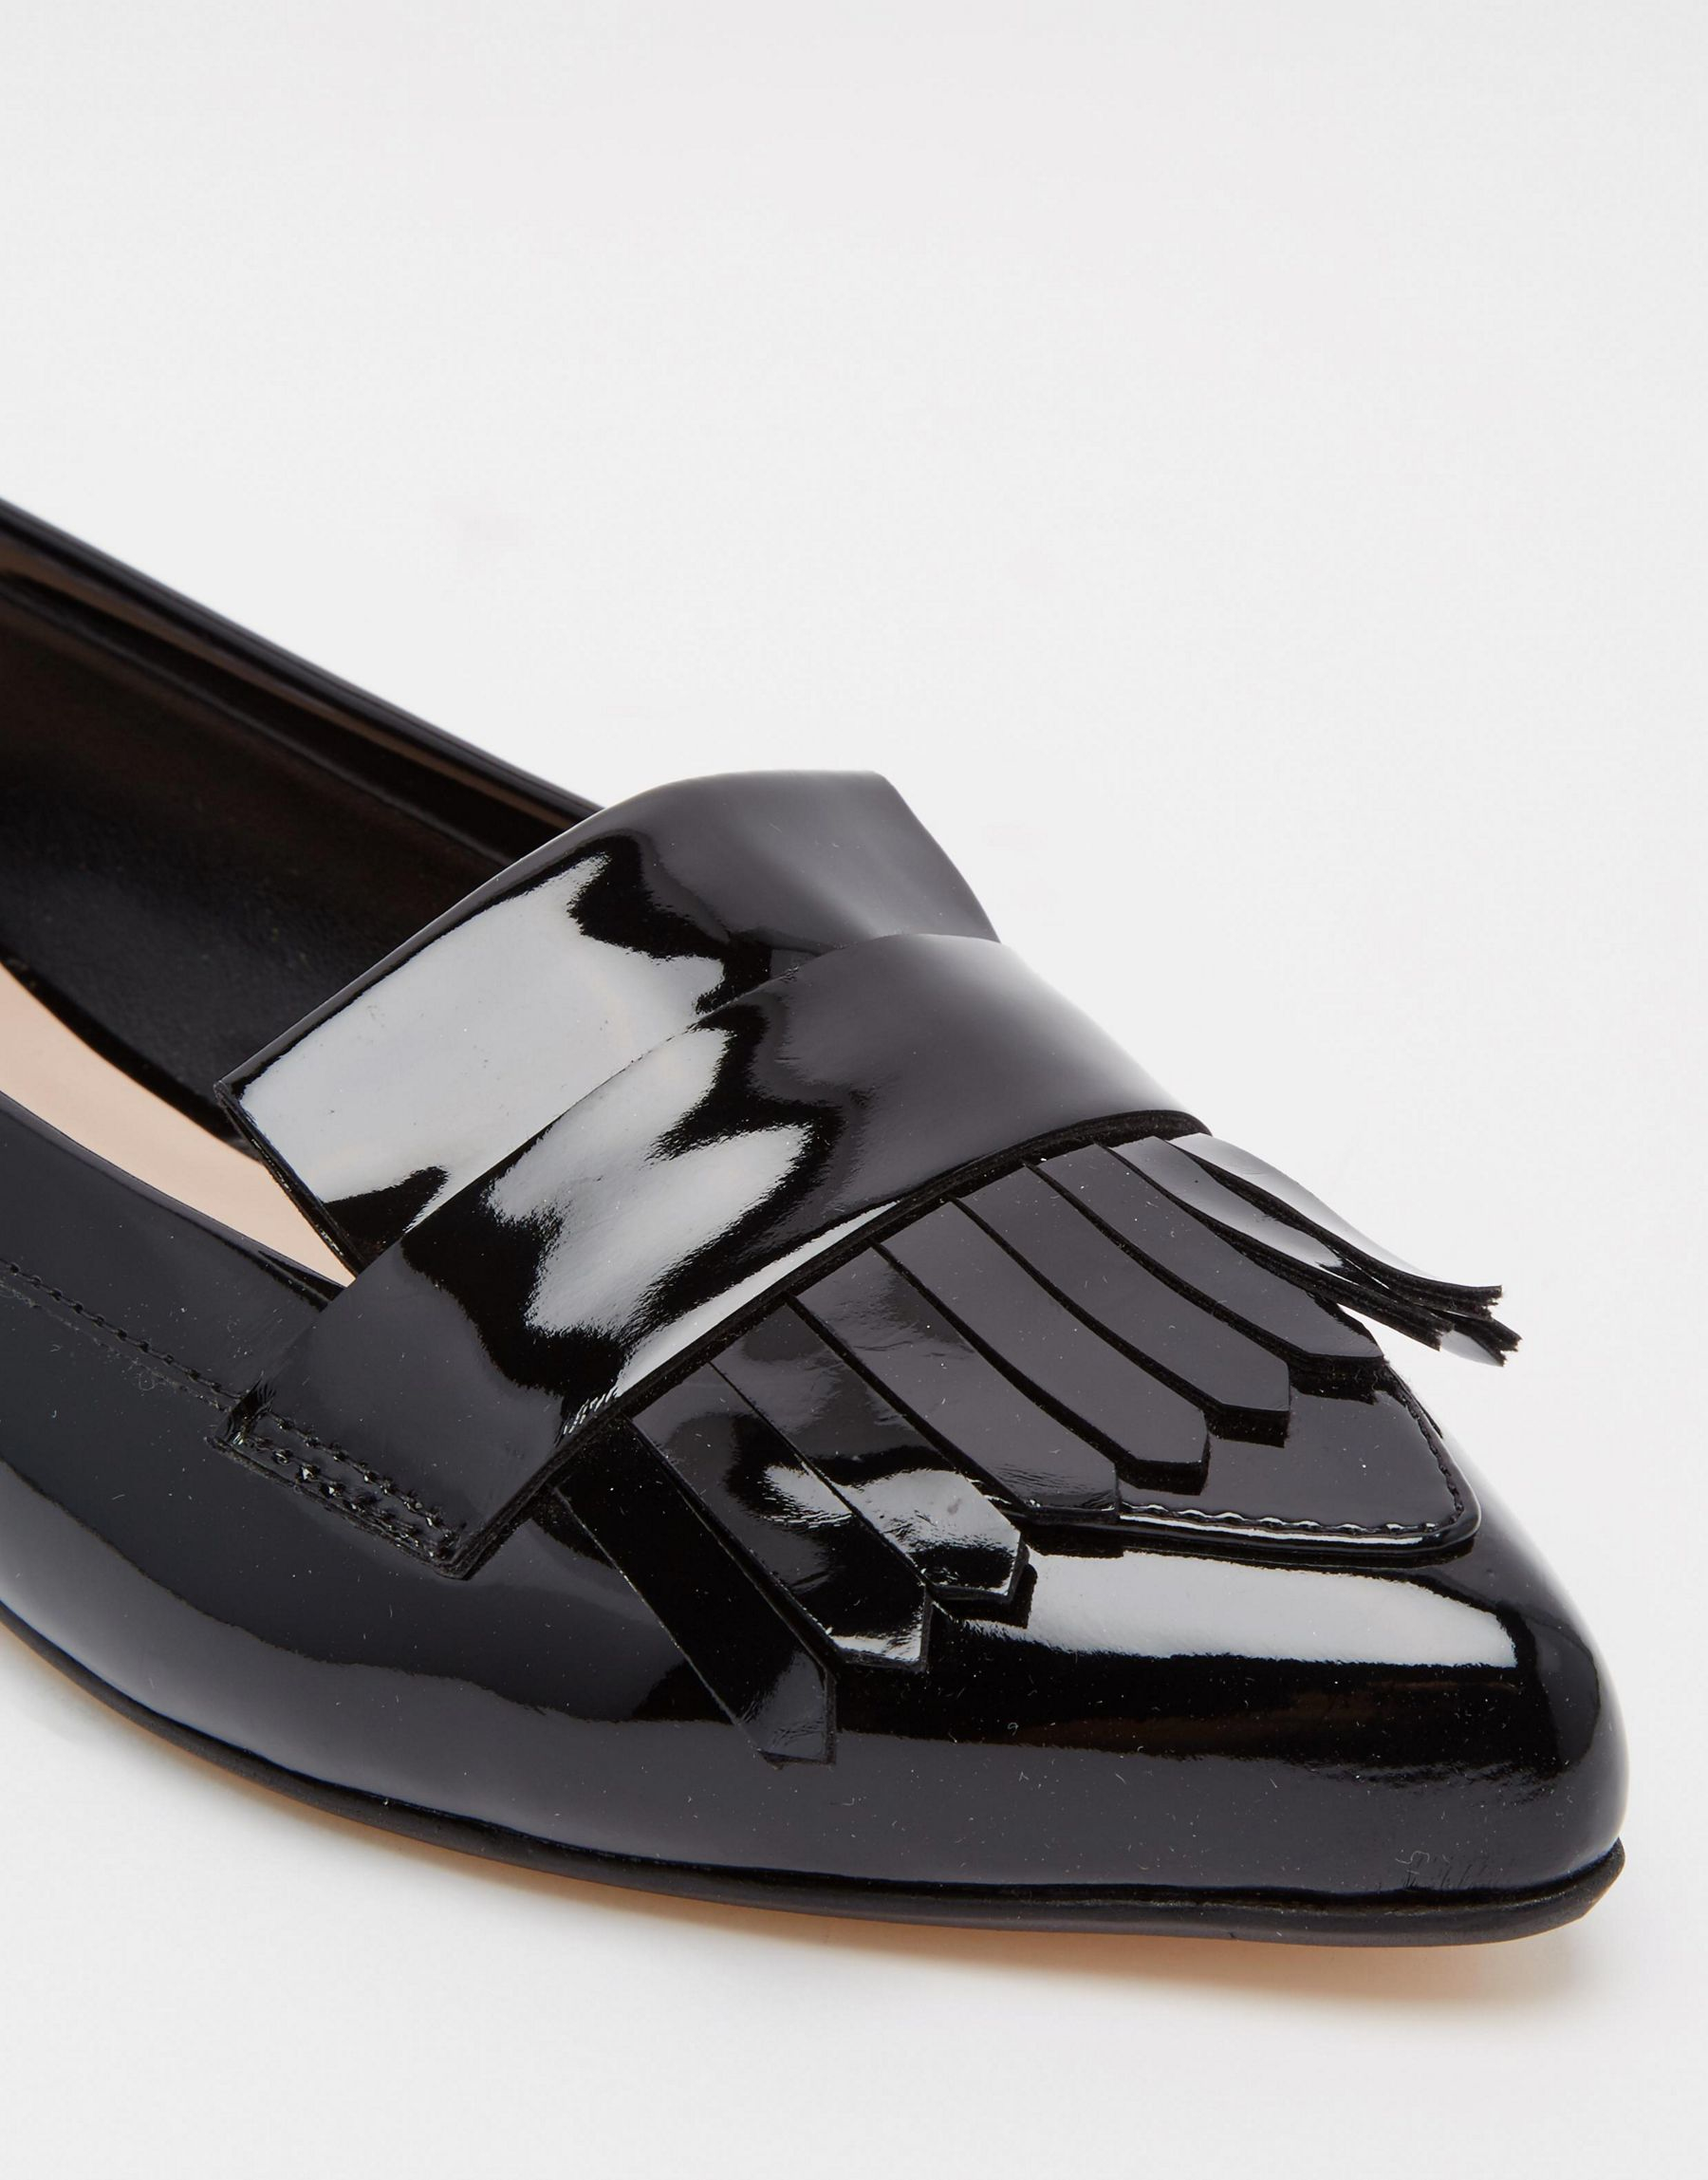 Dune Leather Gersey Patent Fringed Flat Shoes - Black - Lyst